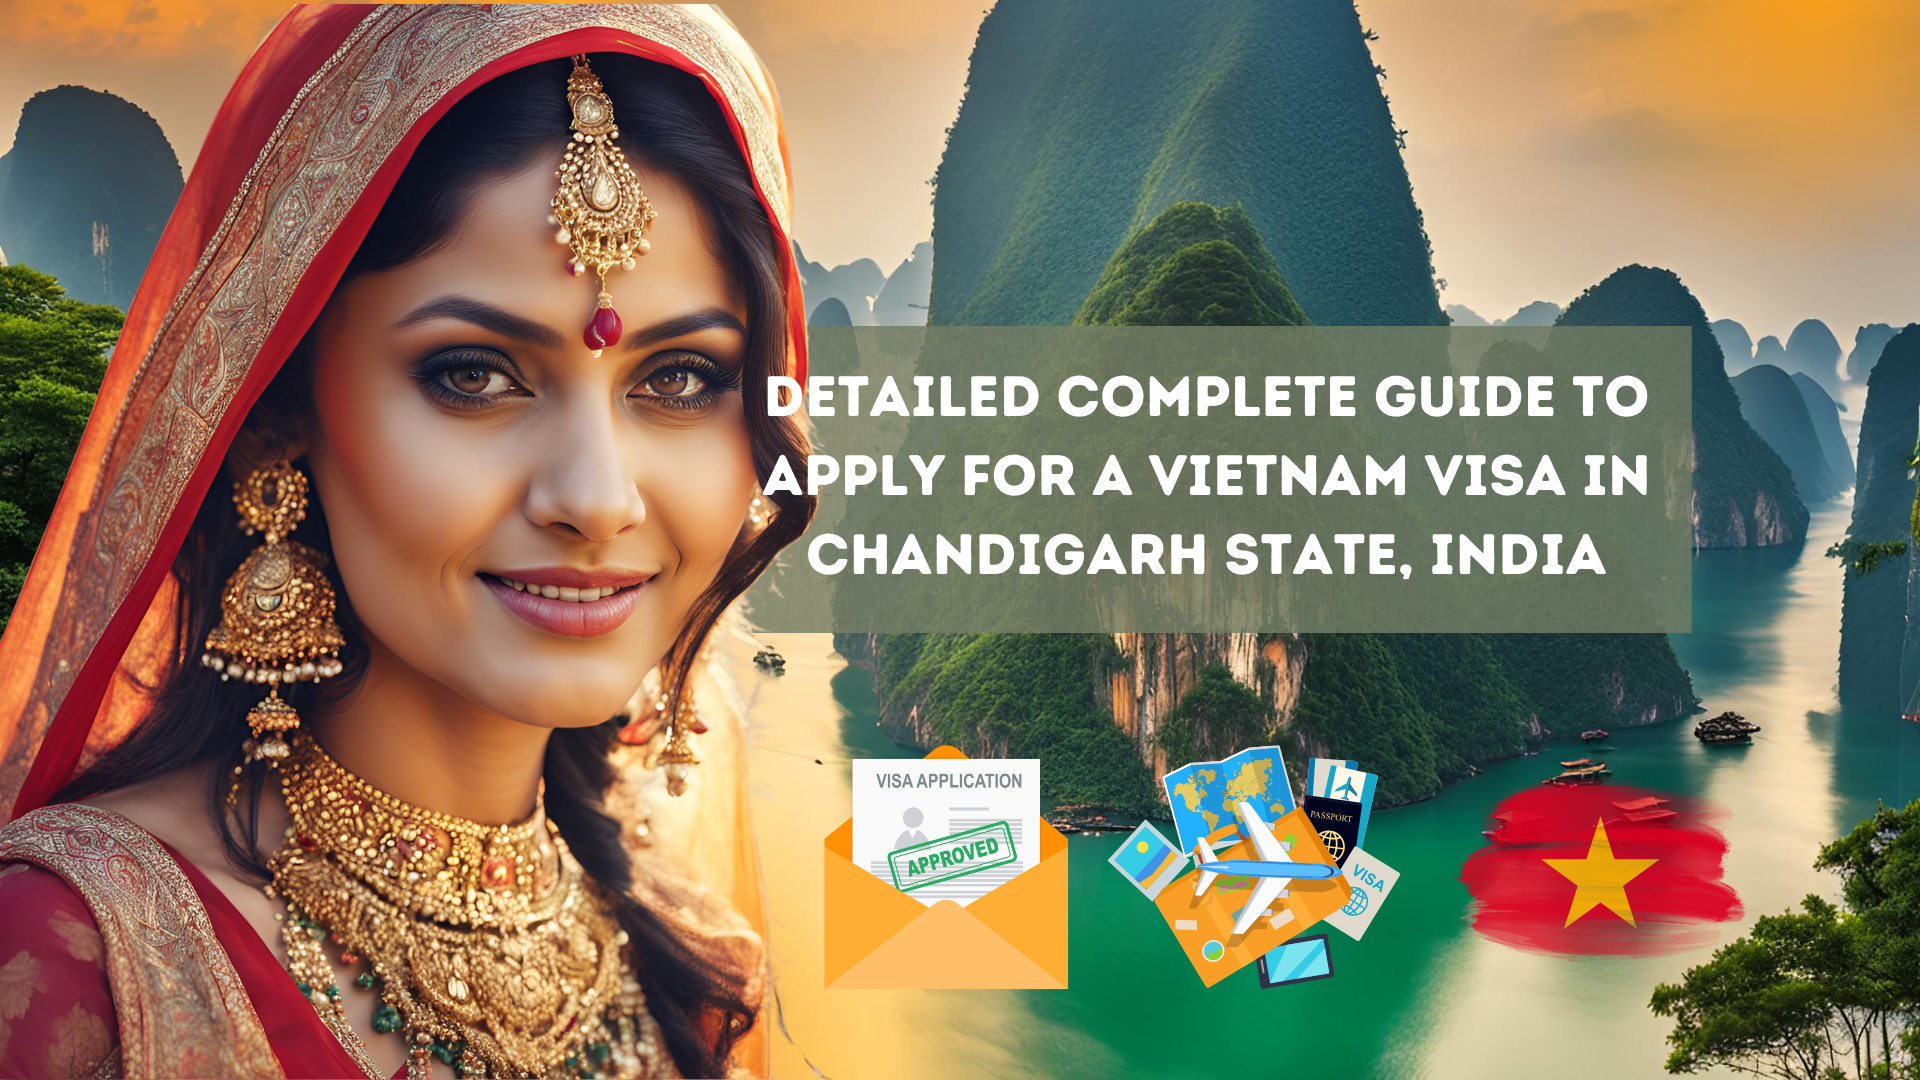 Detailed Complete Guide to Apply for a Vietnam Visa in Chandigarh State, India